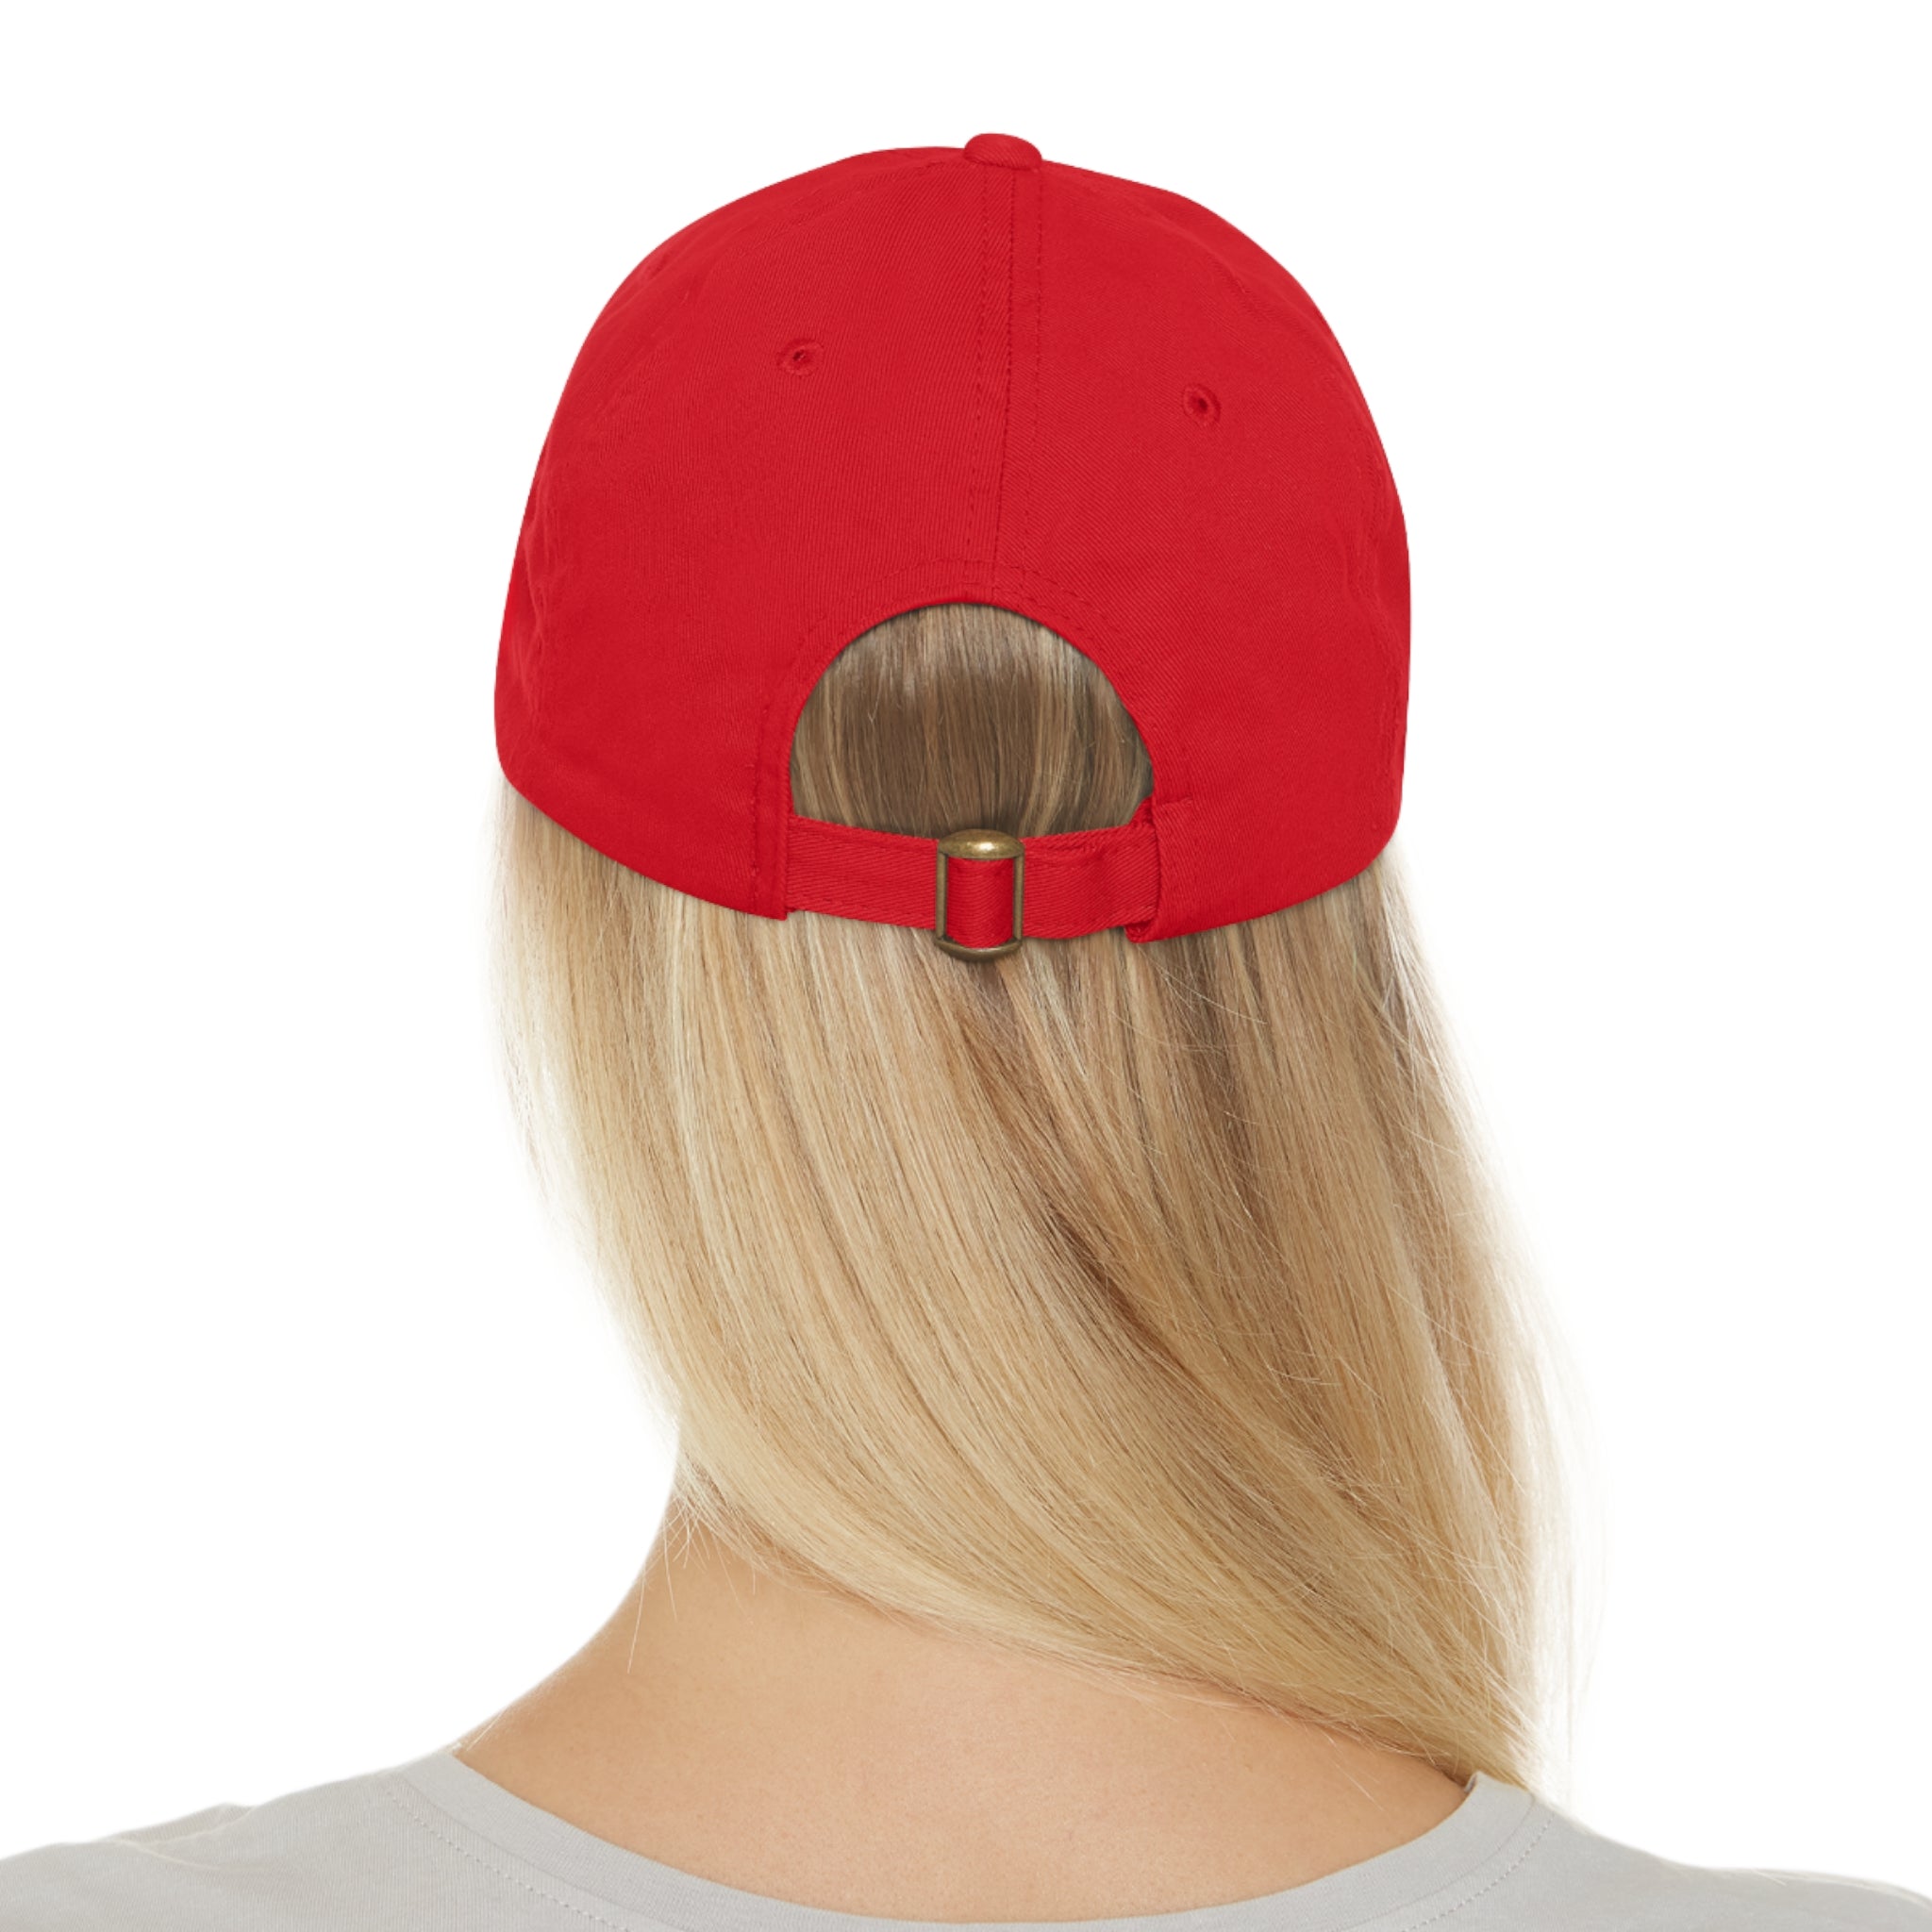 Apollo Moda Red & Black Dad Hat with Leather Patch (Round)